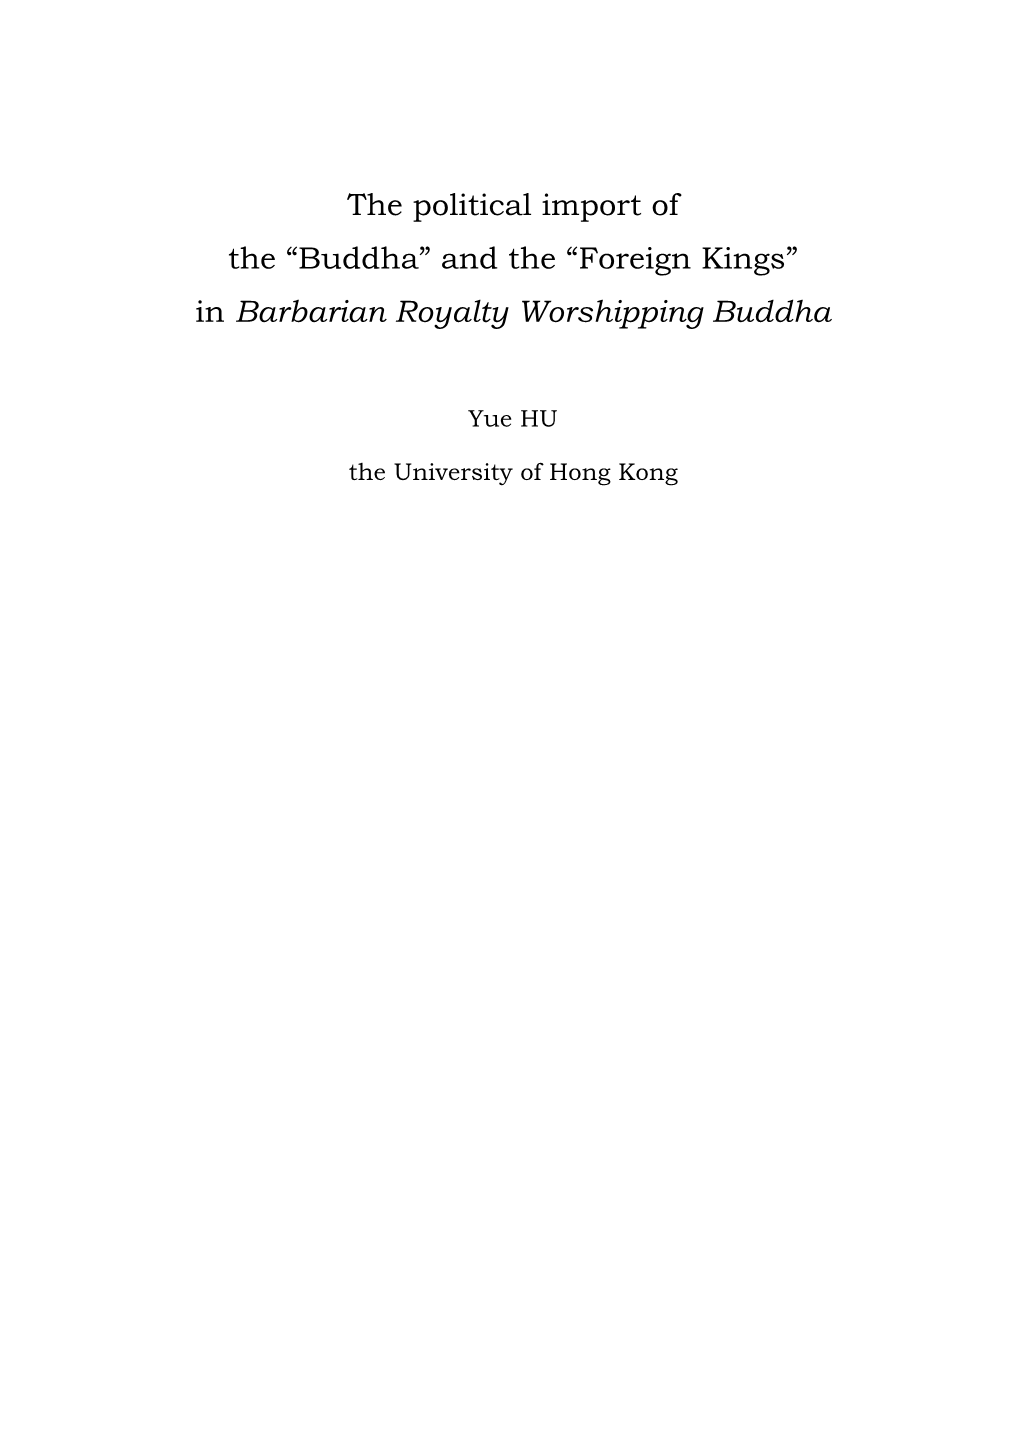 Buddha” and the “Foreign Kings” in Barbarian Royalty Worshipping Buddha